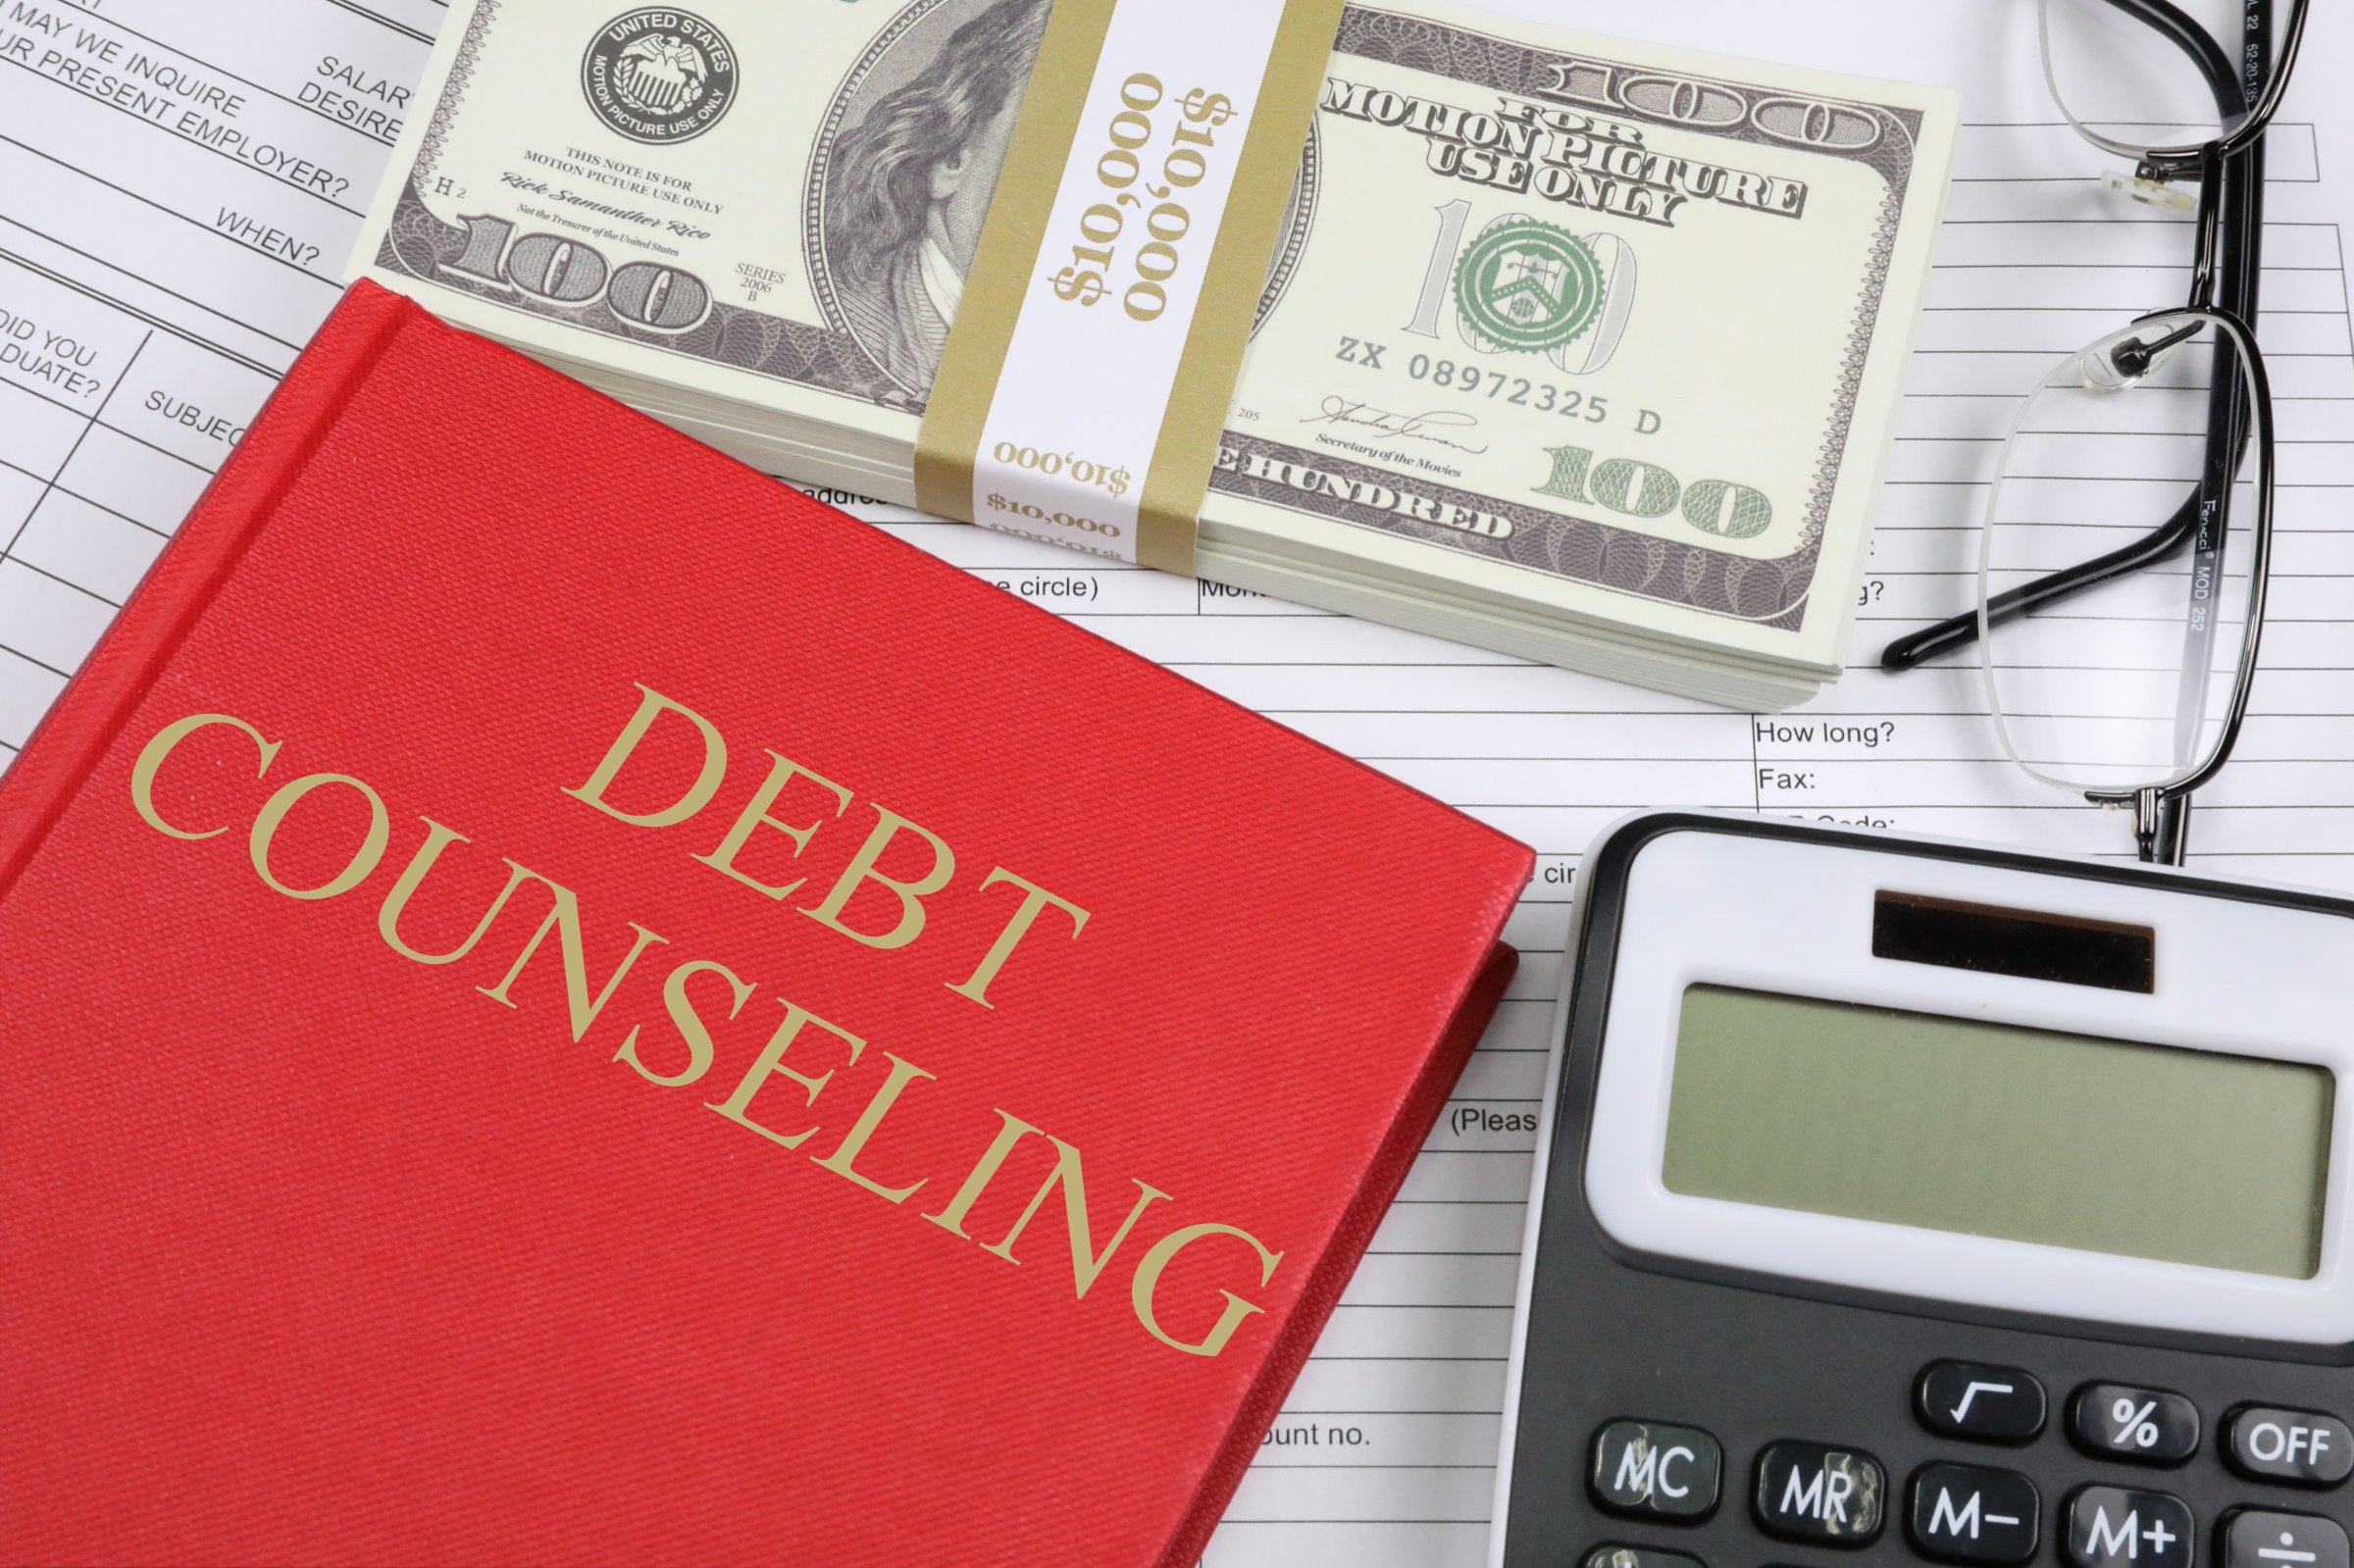 debt counseling